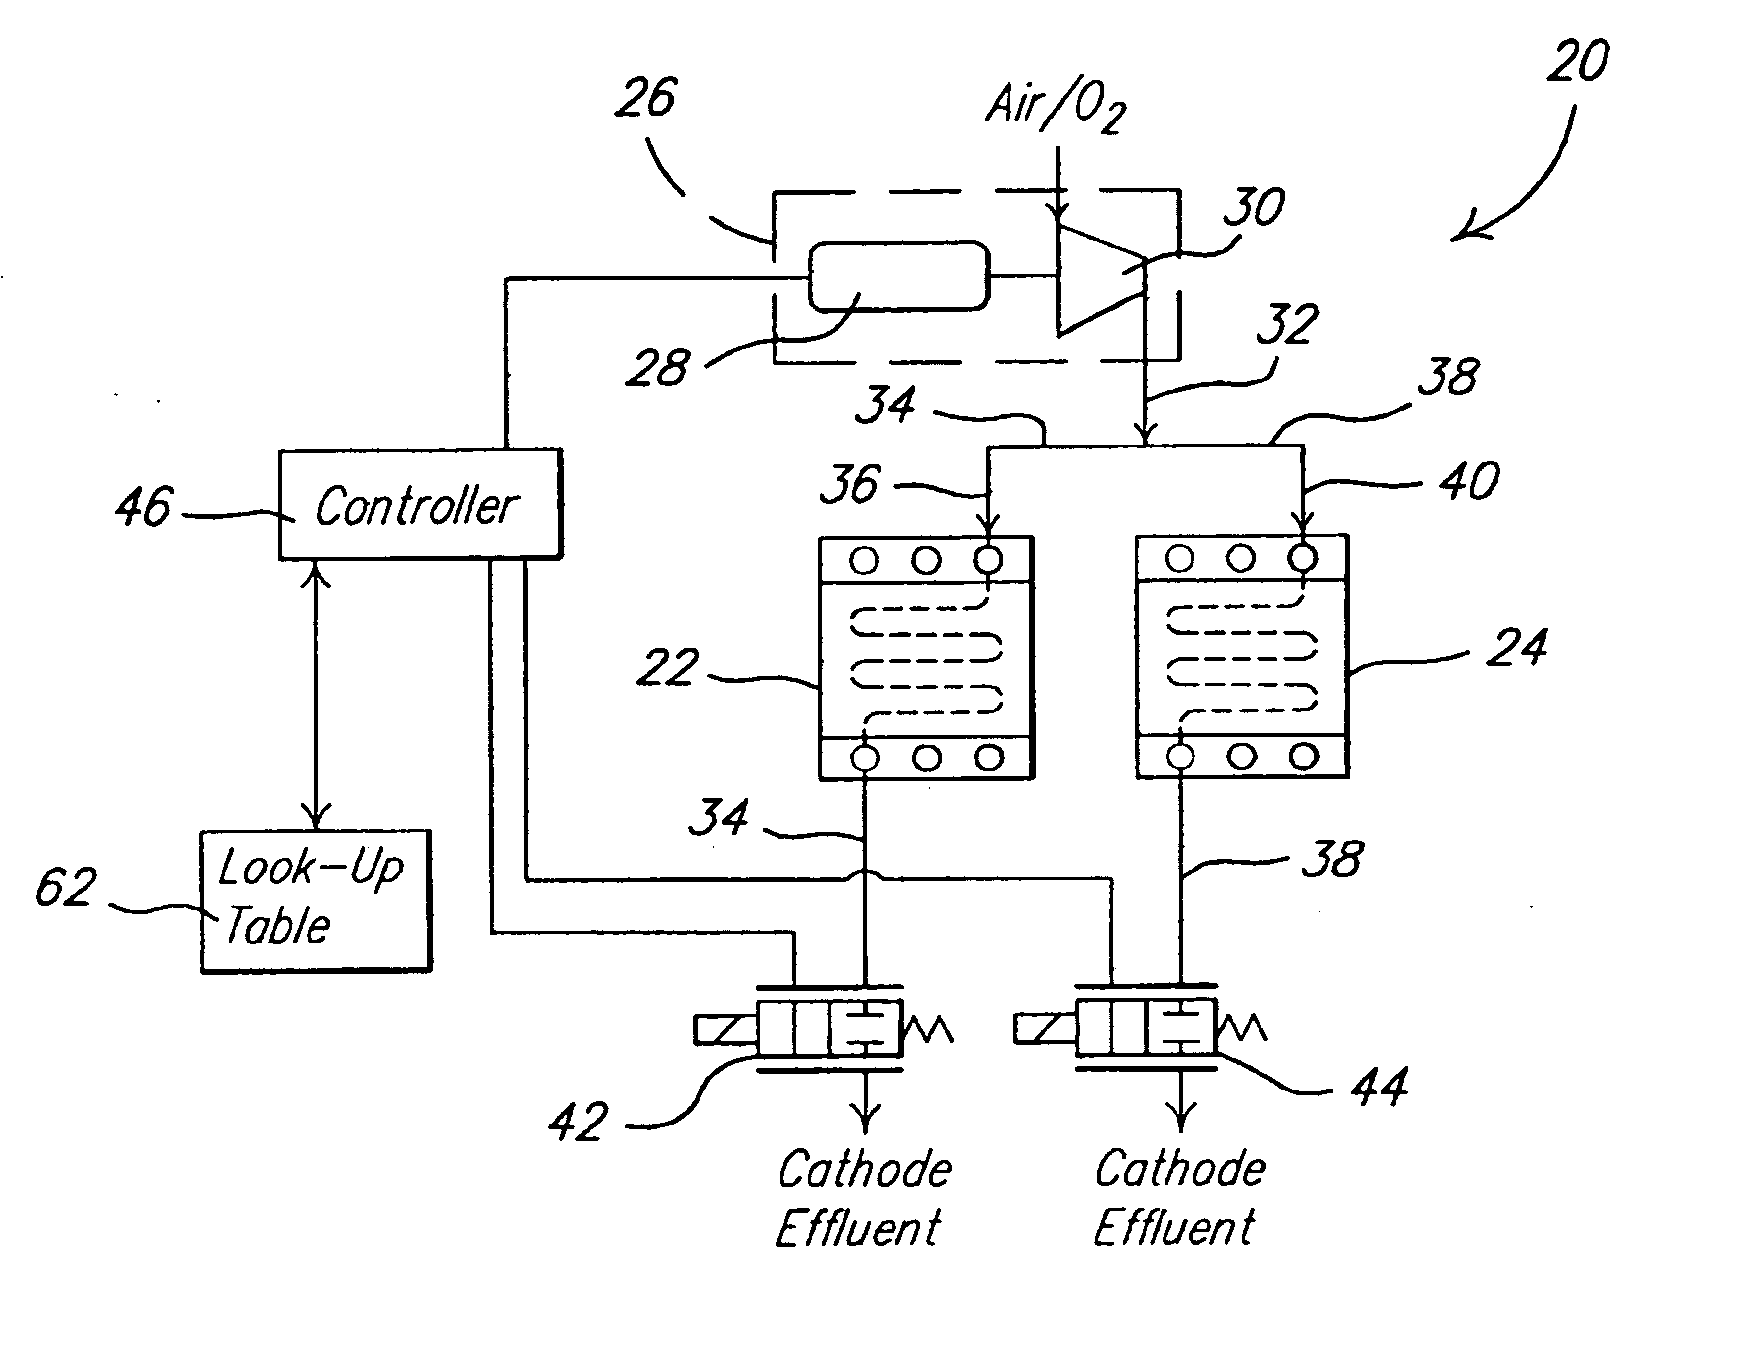 Dynamic cathode gas control for a fuel cell system